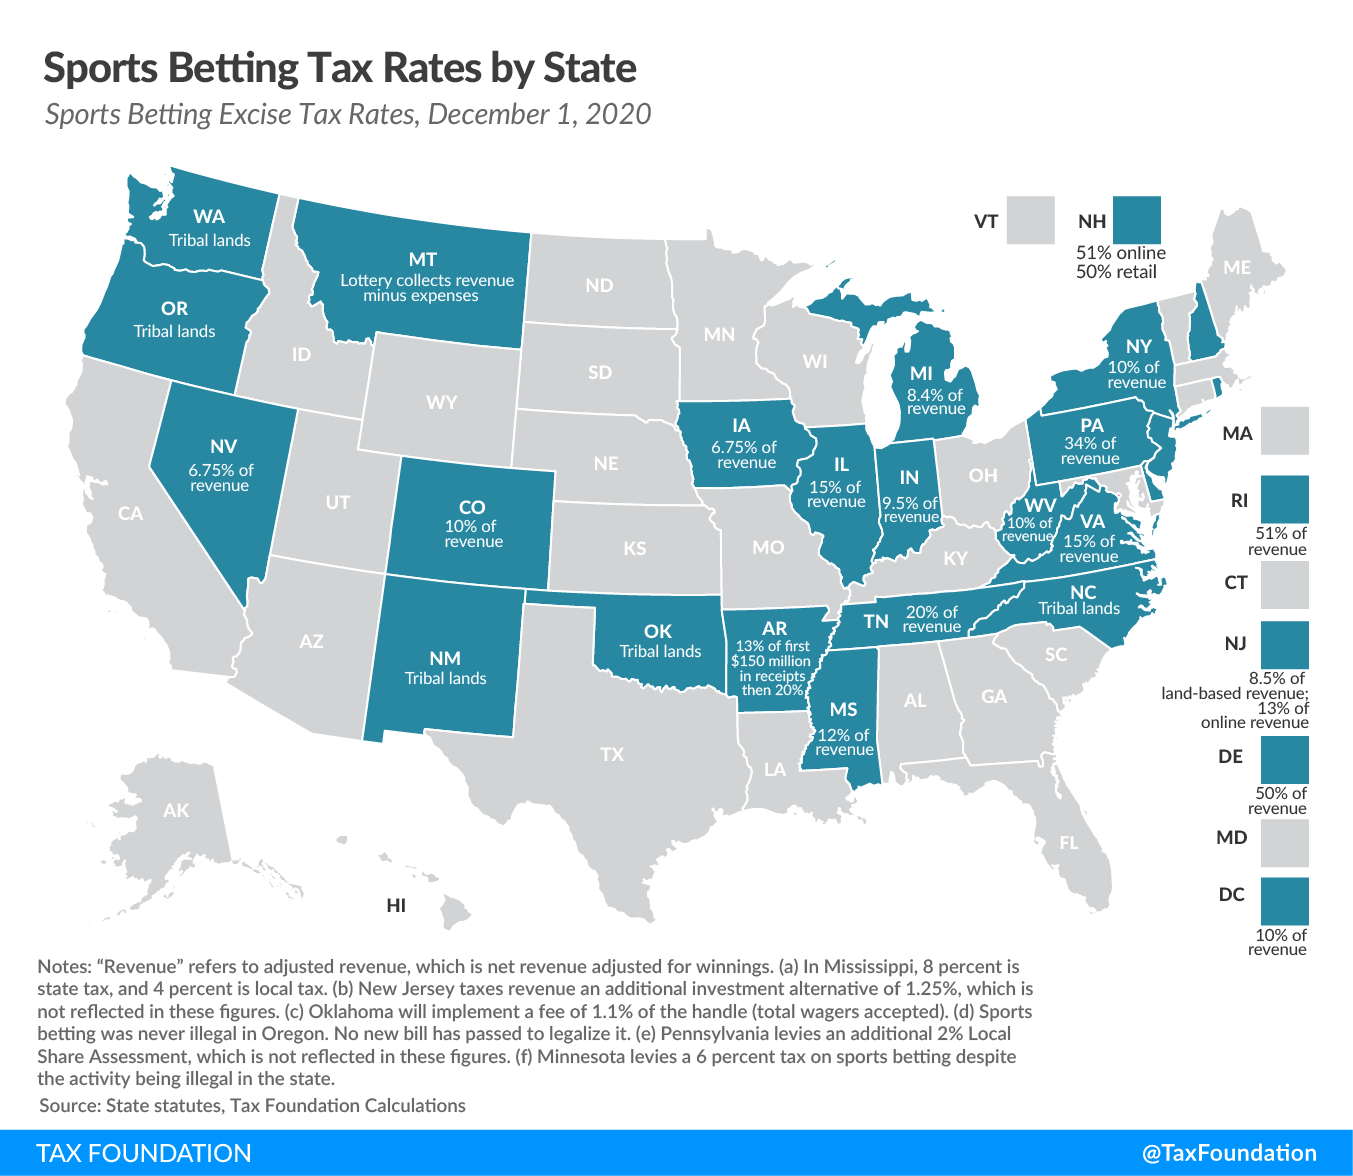 New York sports betting revenue, New York budget gap, New York revenue shortfall, New York fiscal crisis 2021 state vaping tax rates, 2021 state taxes on vaping, 2021 state vape tax rates, 2021 excise taxes and 2021 excise tax trends